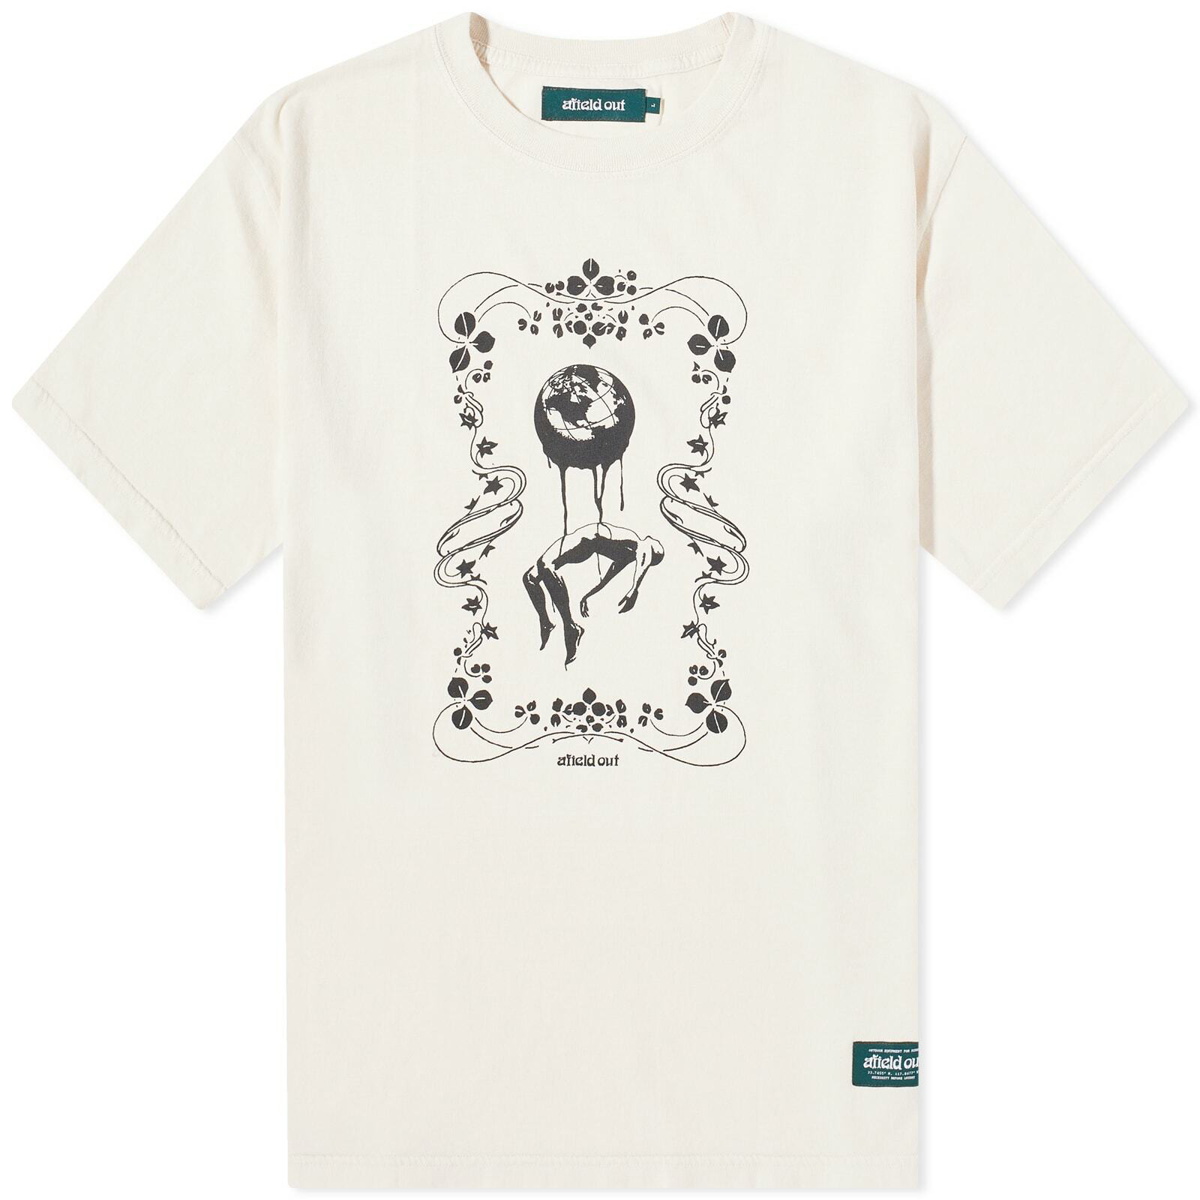 Afield Out Men's Universe T-Shirt in Bone Afield Out